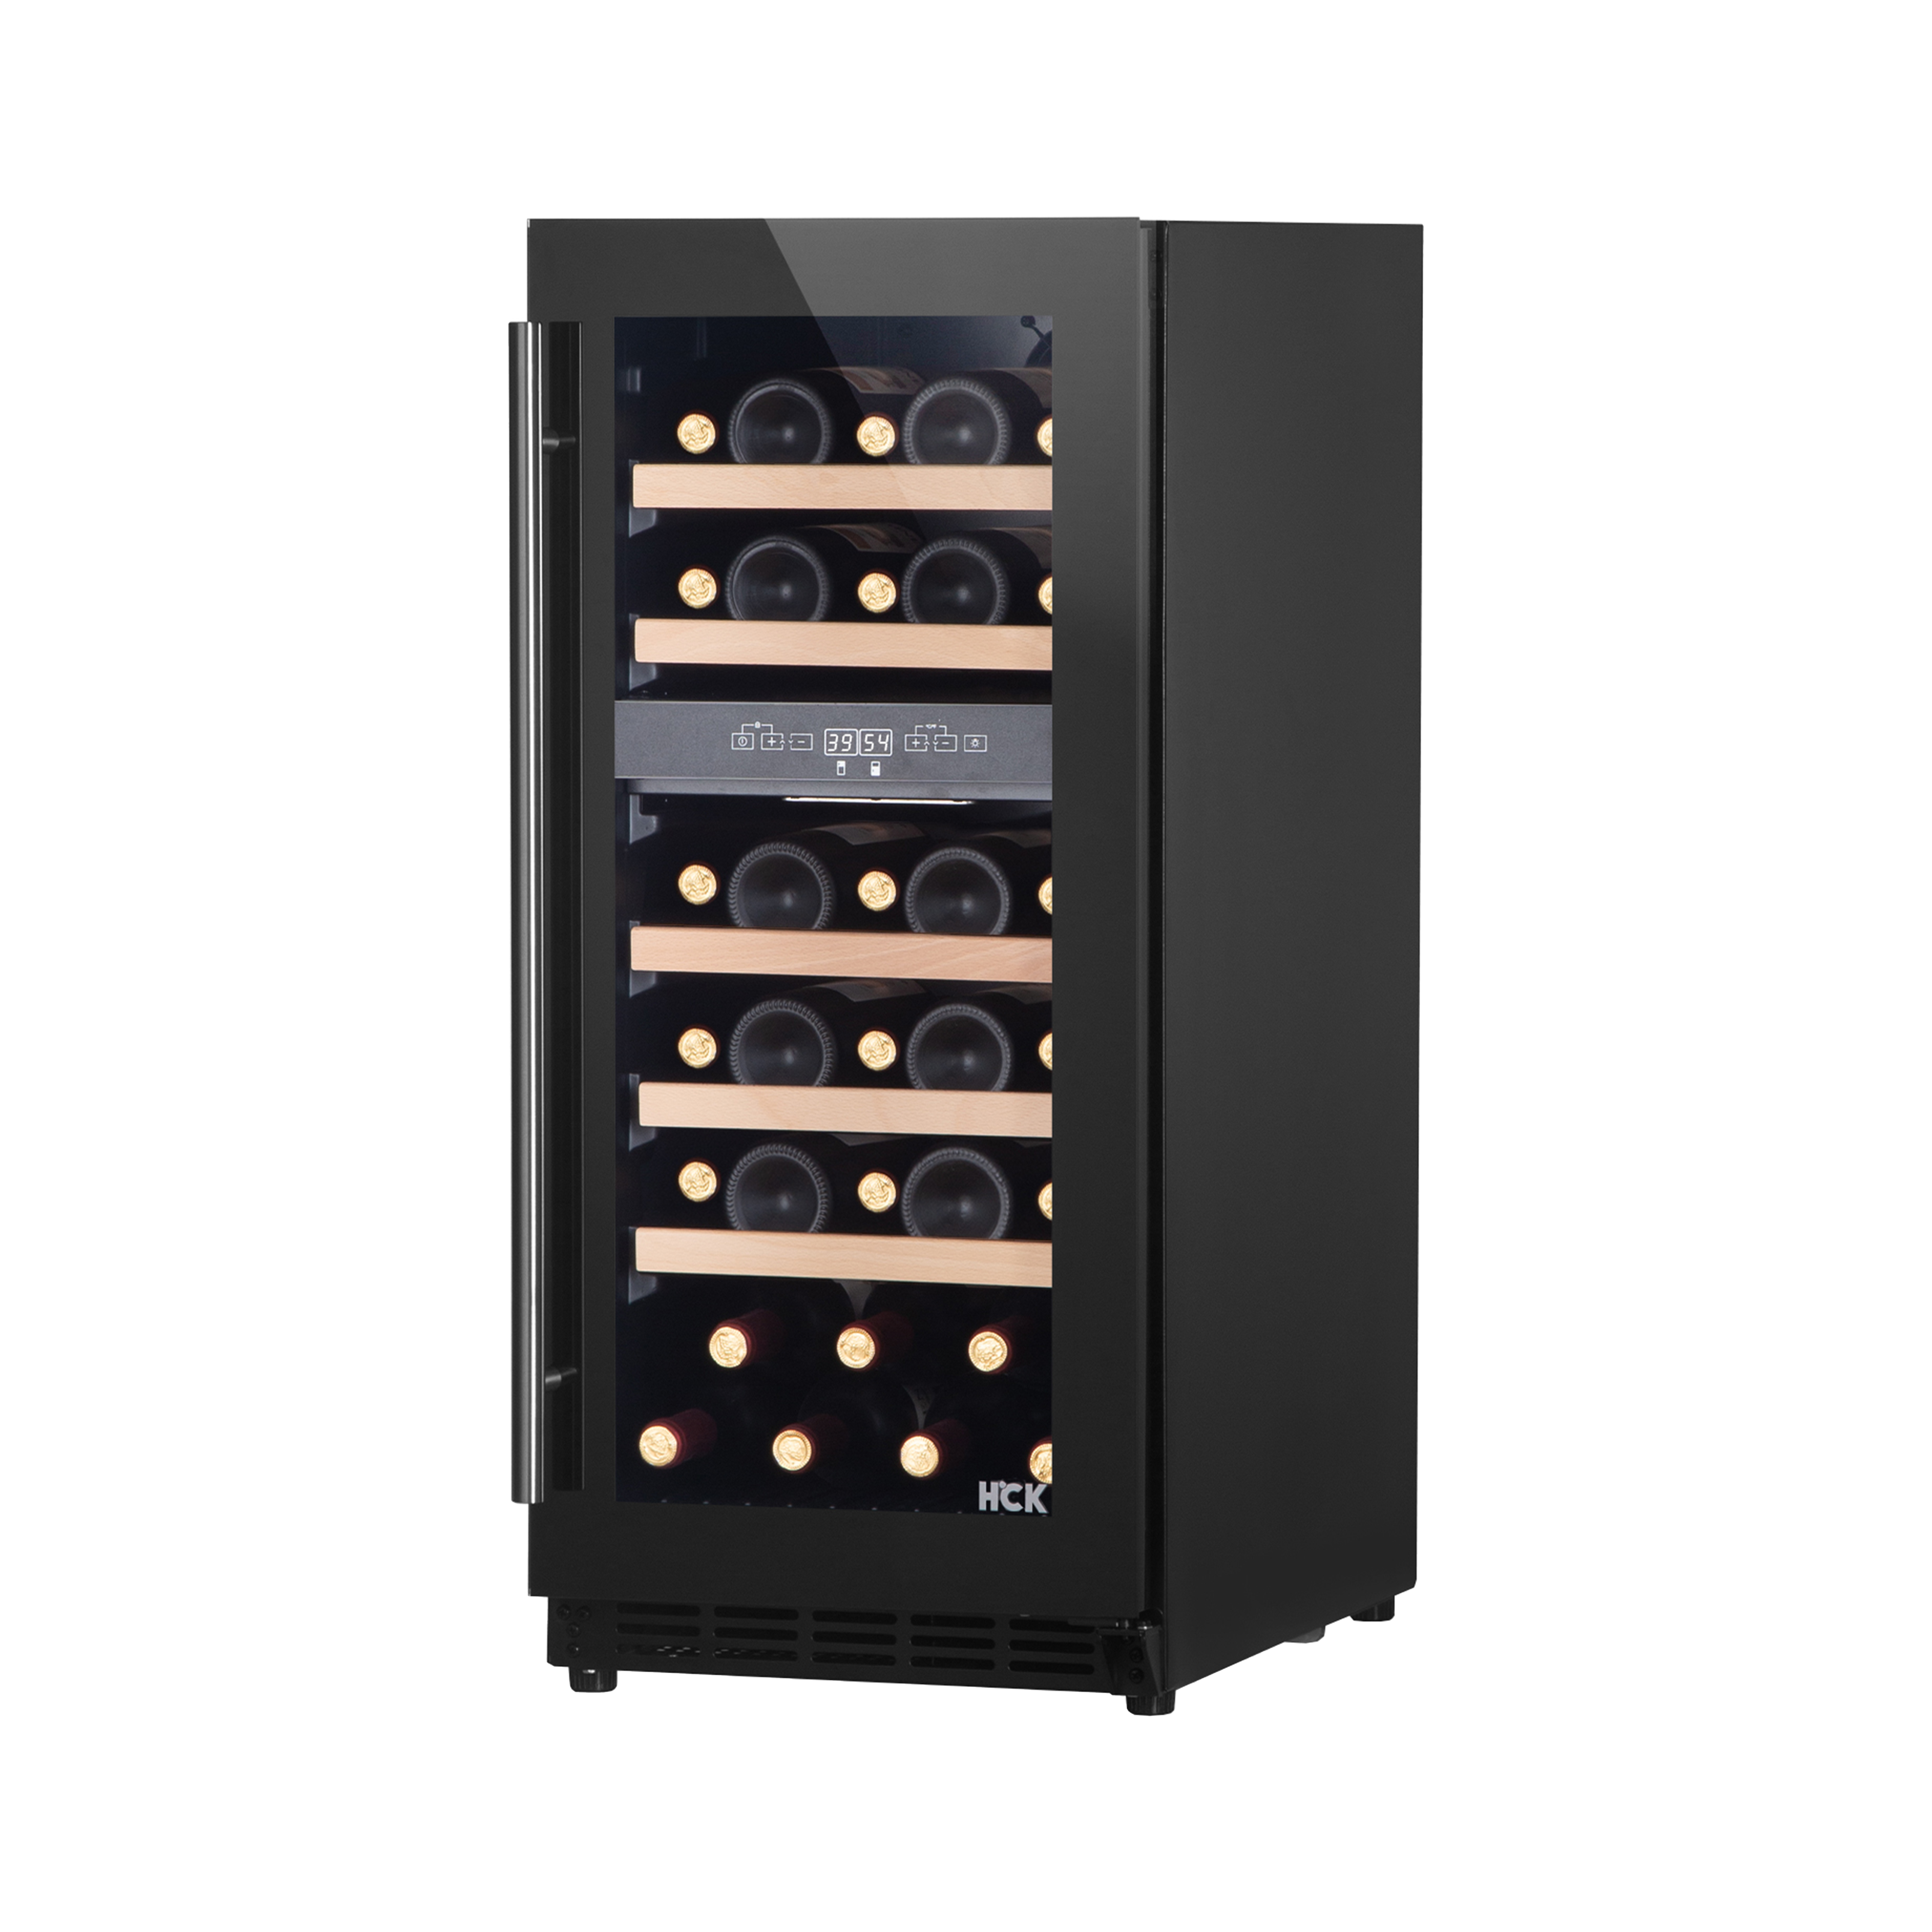 Side view of a 2.9 Cu Ft Freestanding Dual Zone Wine Cooler 29 bottles with transparent door. The content of the fridge can be seen through the door